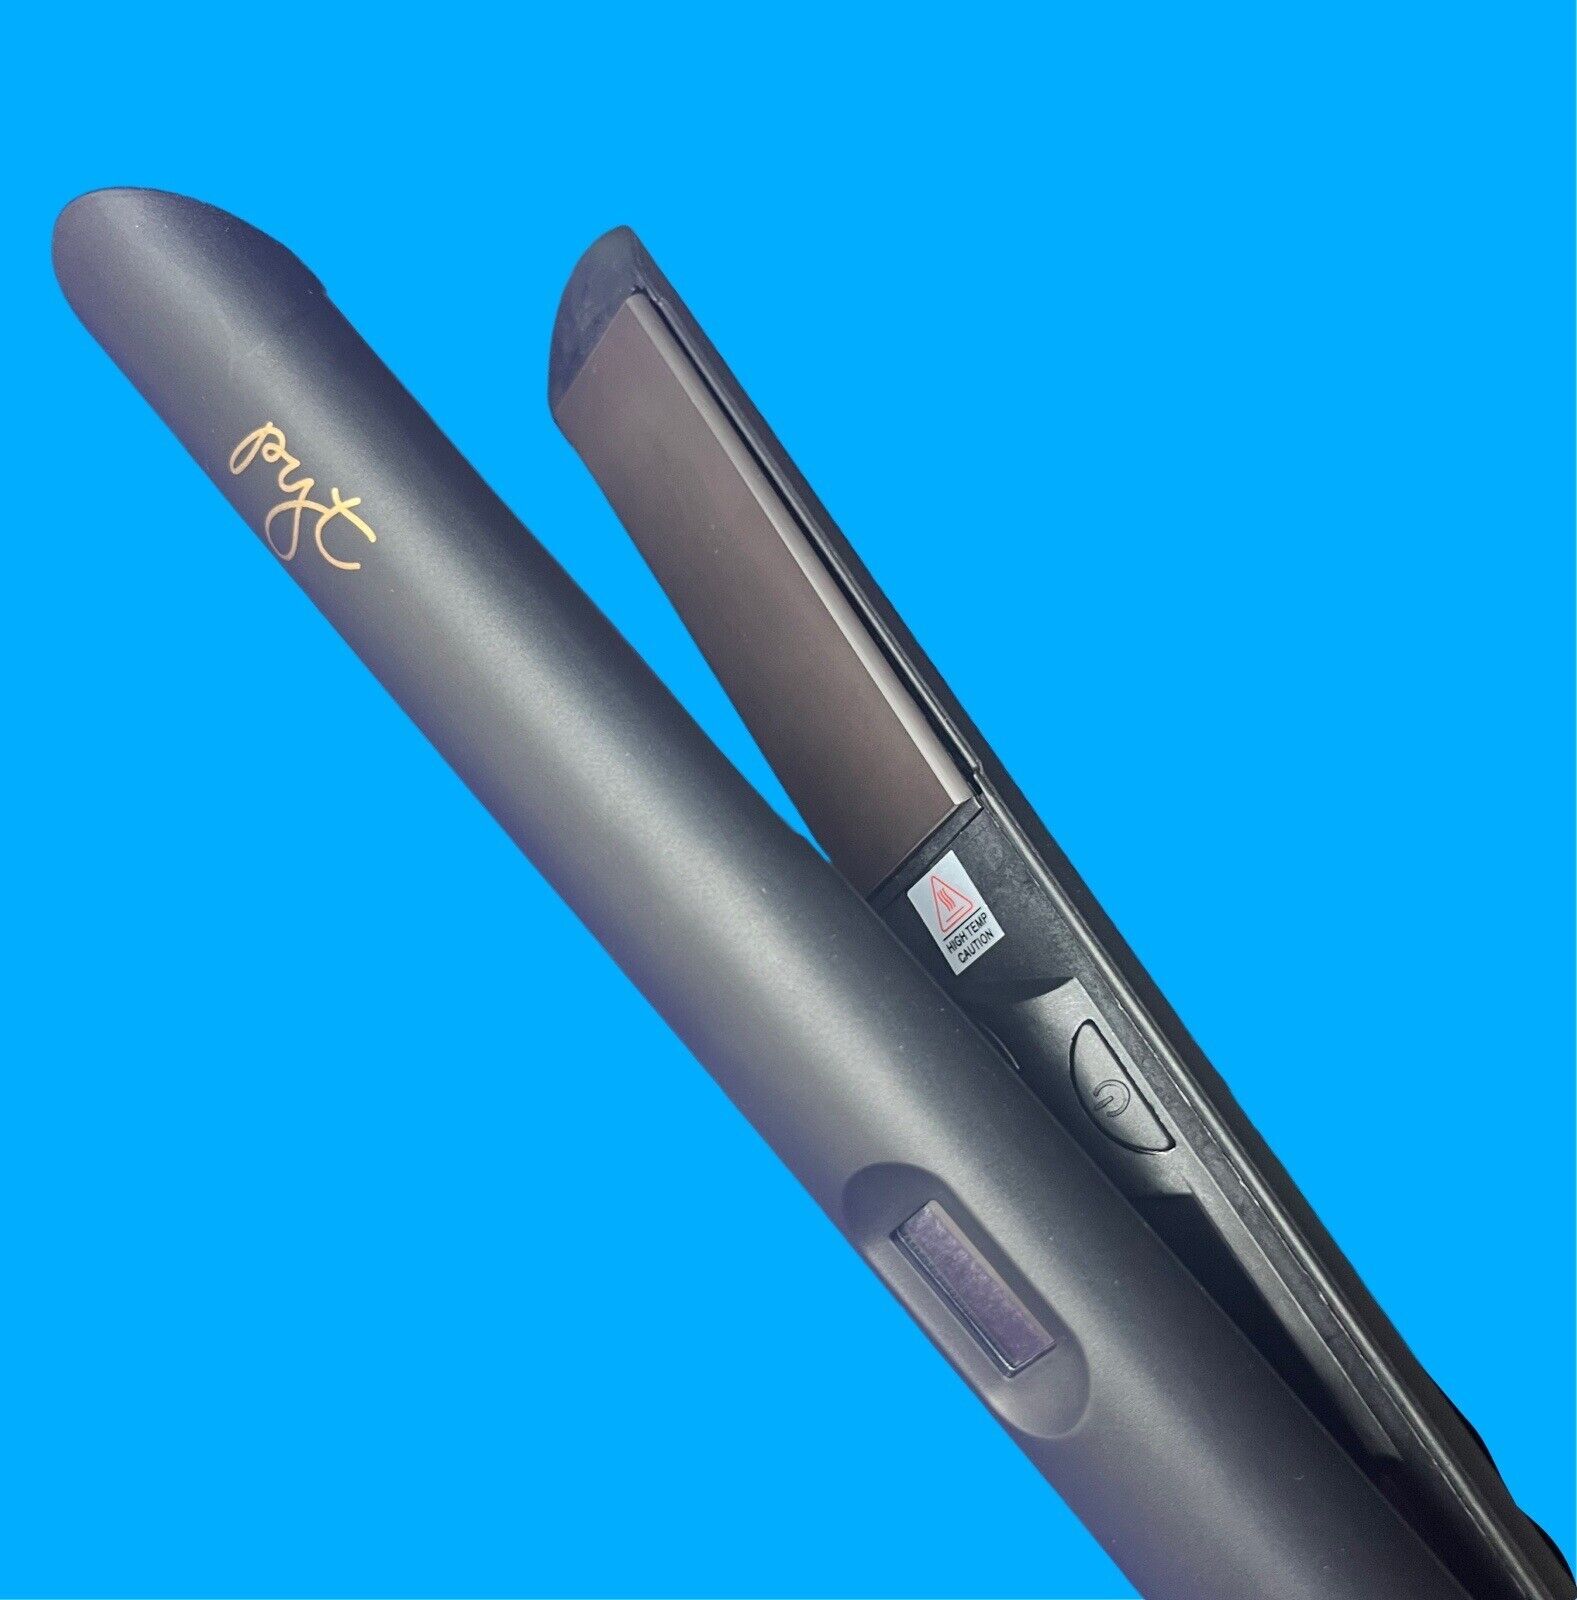 PYT HAIR Ion Fusion 2.0 Pro Digital Ceramic Styler in Onyx New in Box MSRP $300 - $74.24